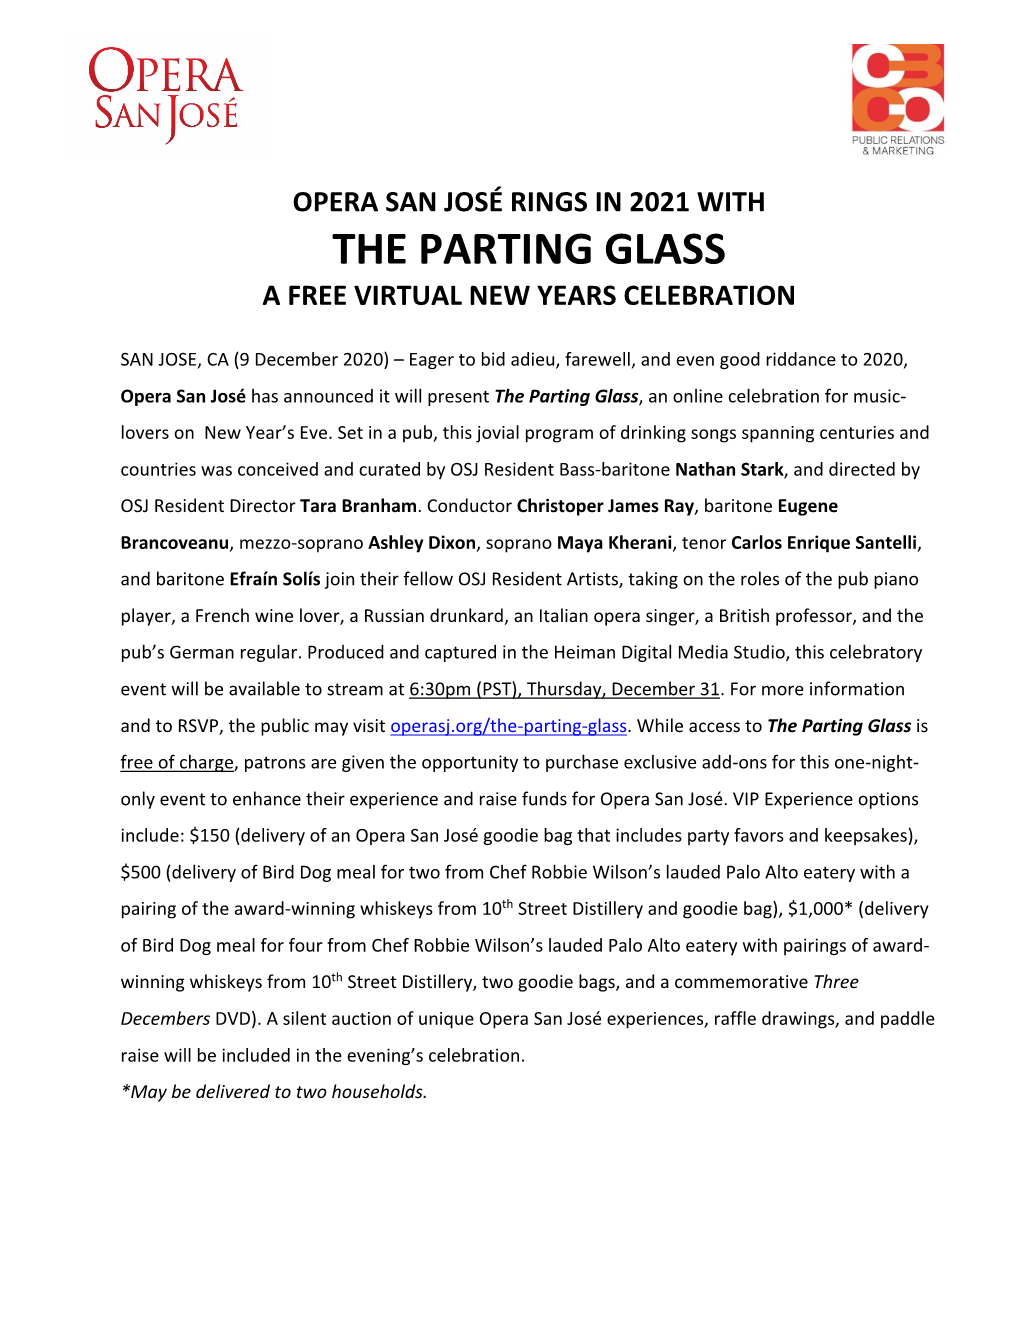 The Parting Glass a Free Virtual New Years Celebration